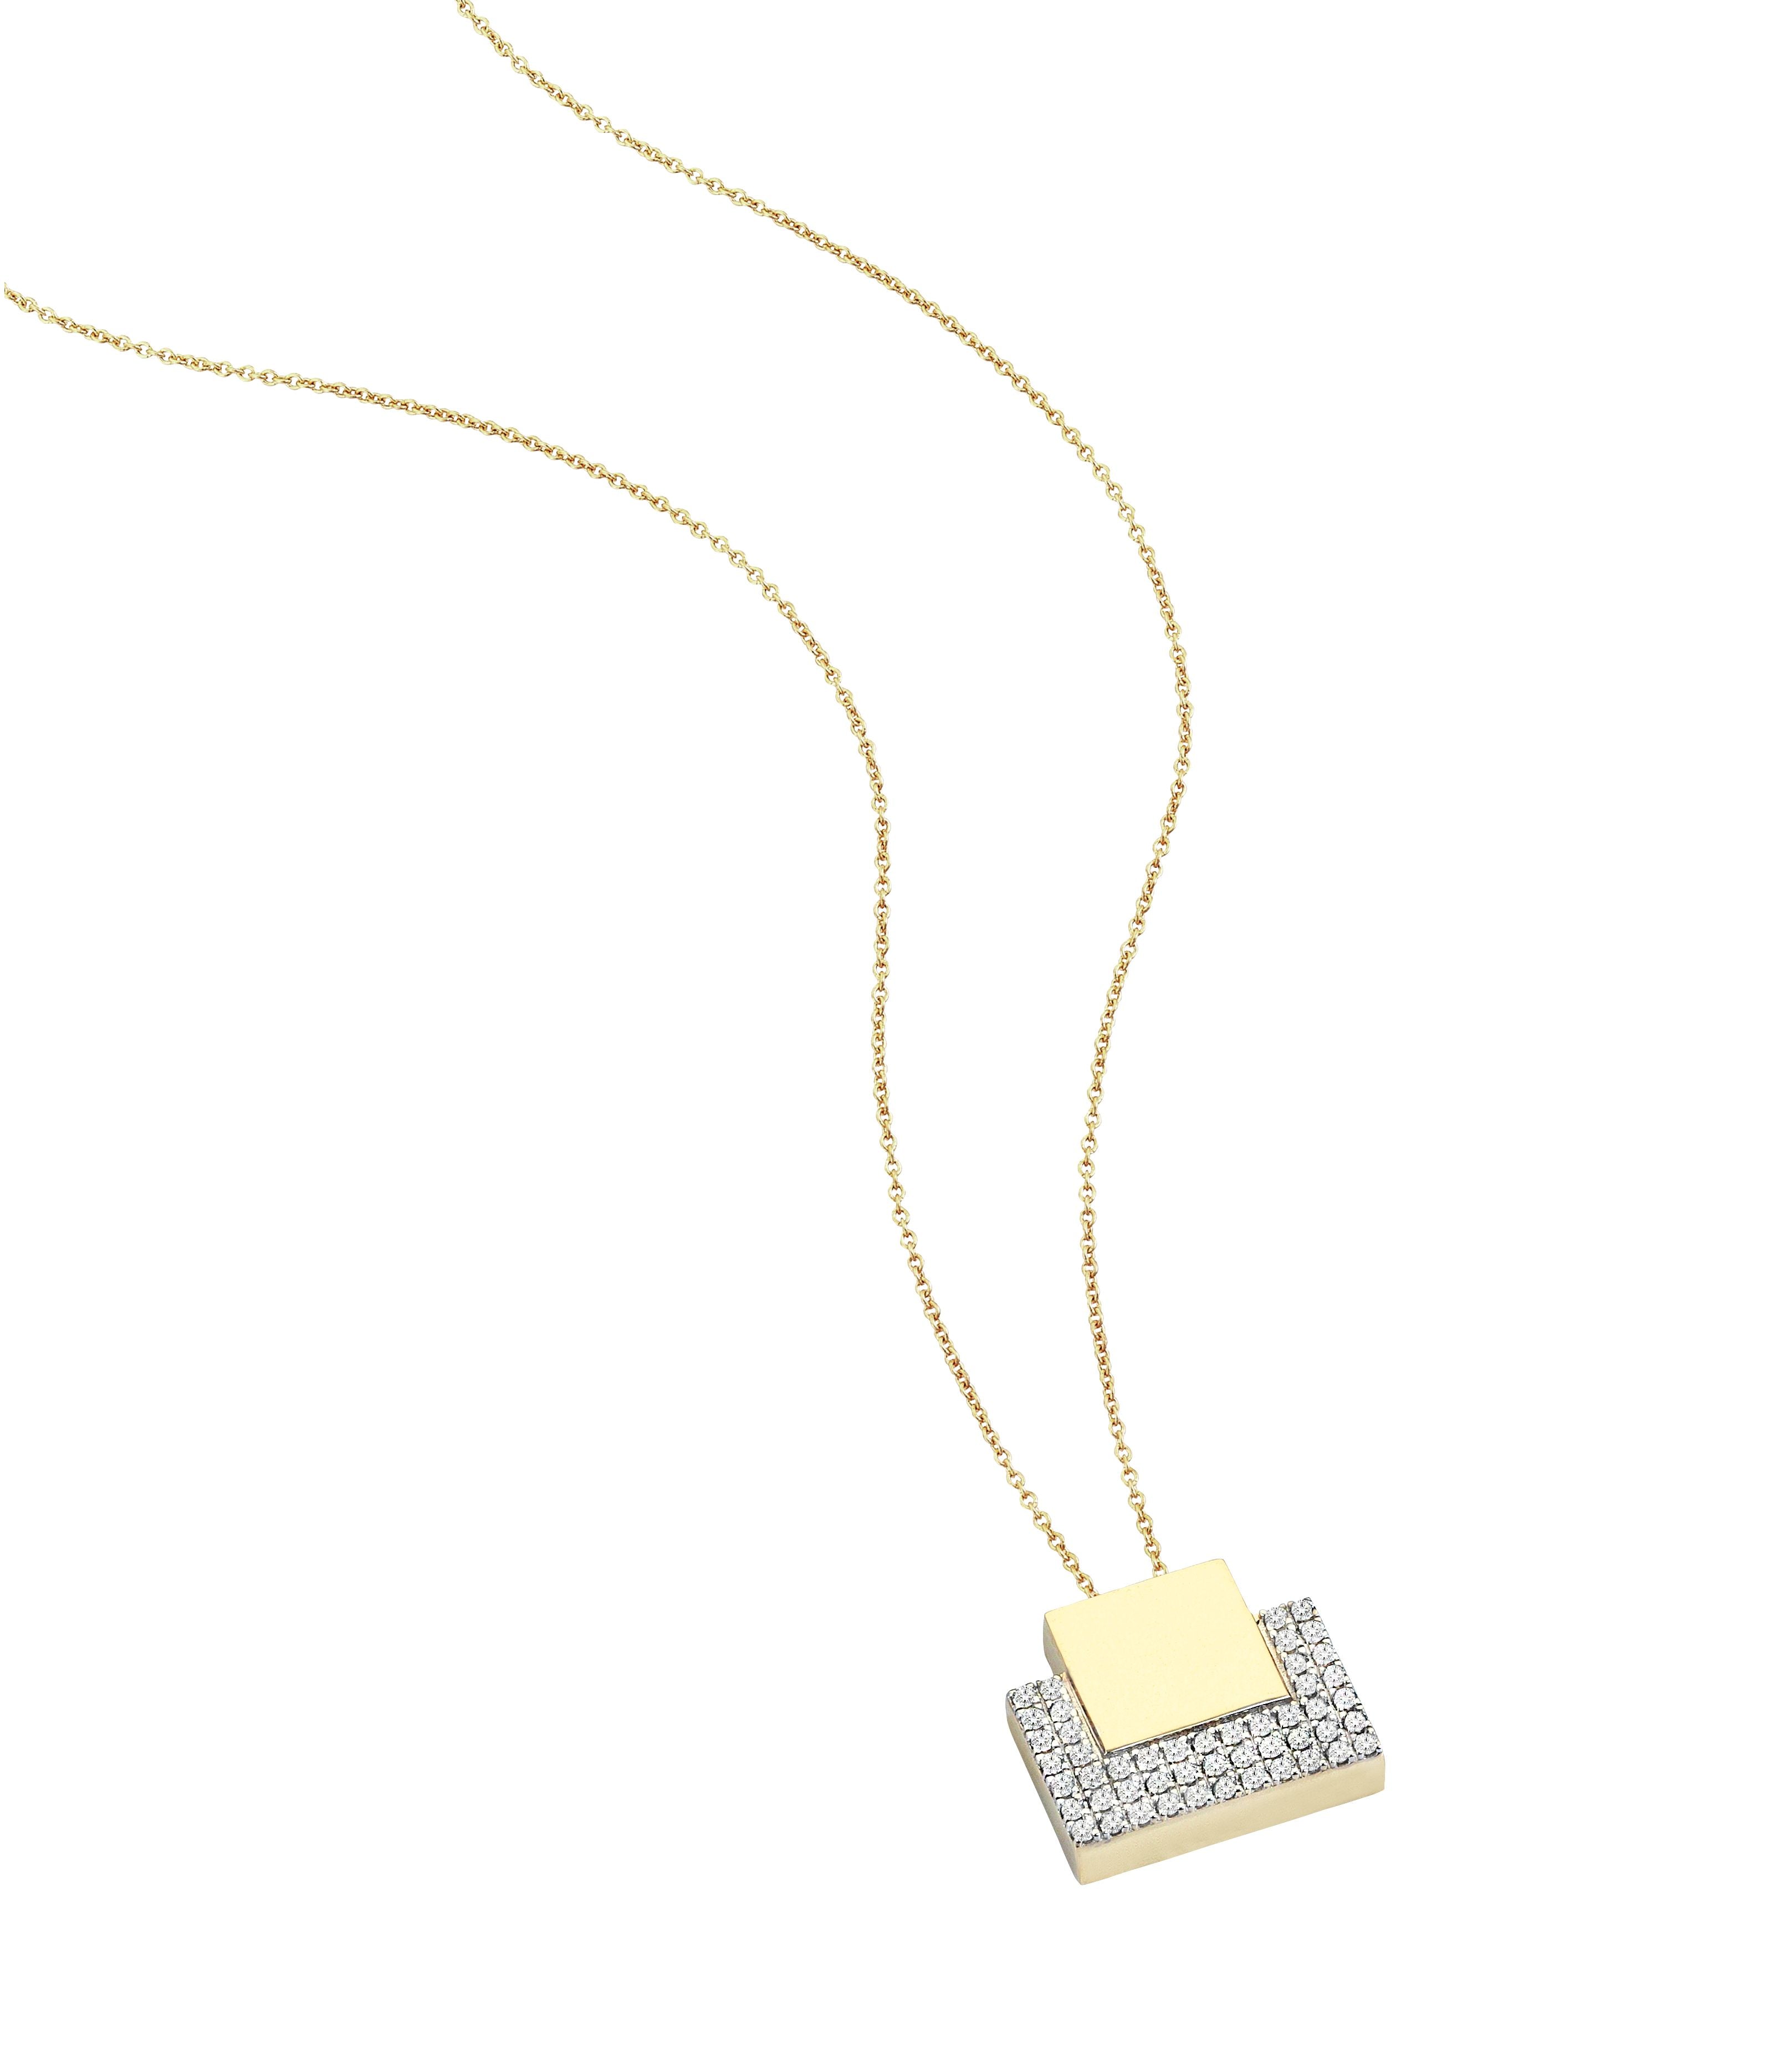 Pave Purse Necklace in Yellow Gold - Her Story Shop